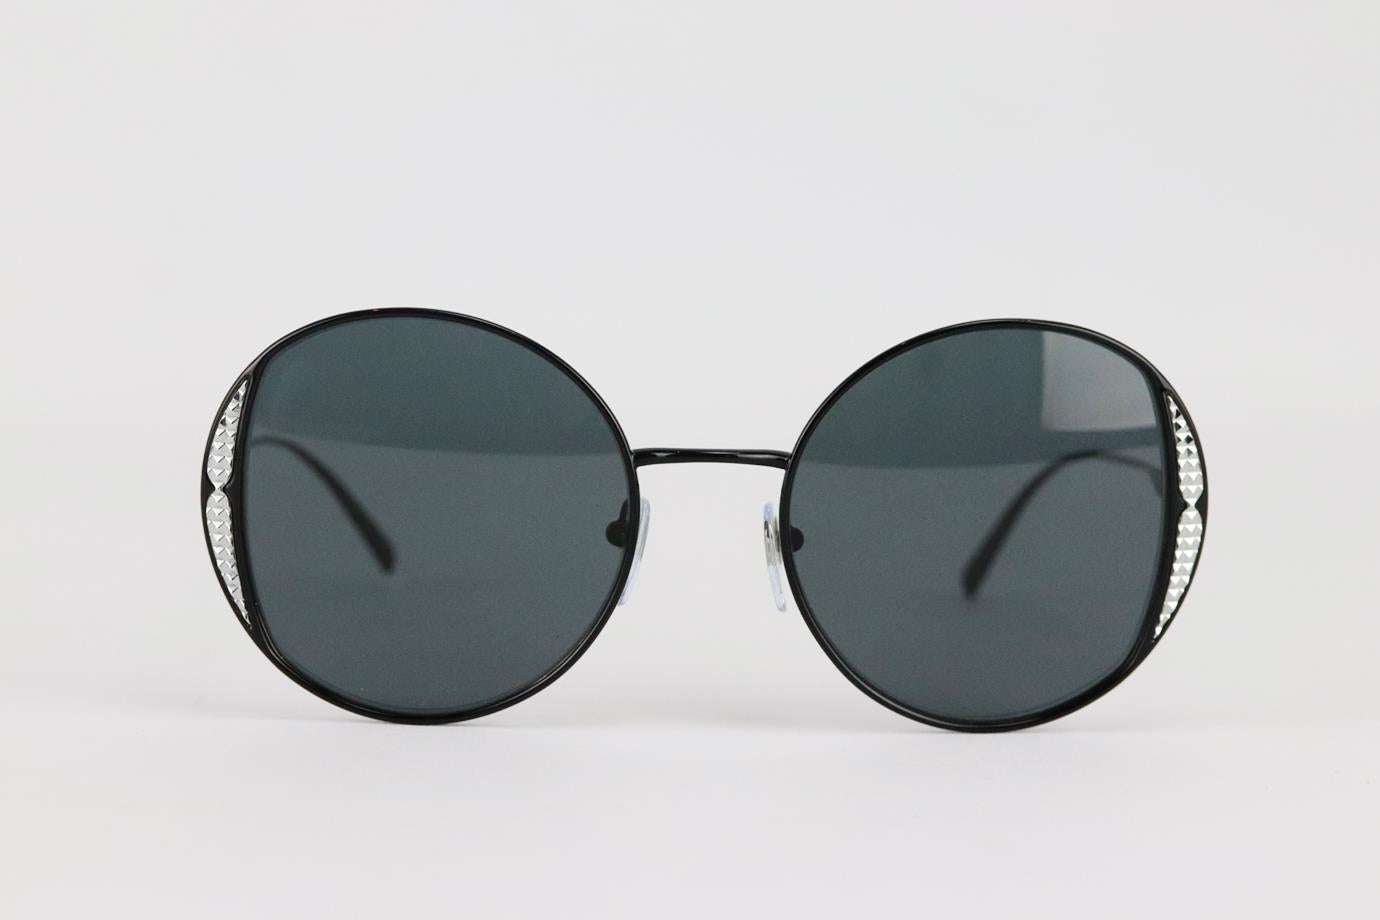 Bvlgari round frame metal sunglasses. Black. Comes with case. Style code: 6169 2066/87. Lens size: 53 mm. Arm size: 140 mm. Bridge size: 20 mm
